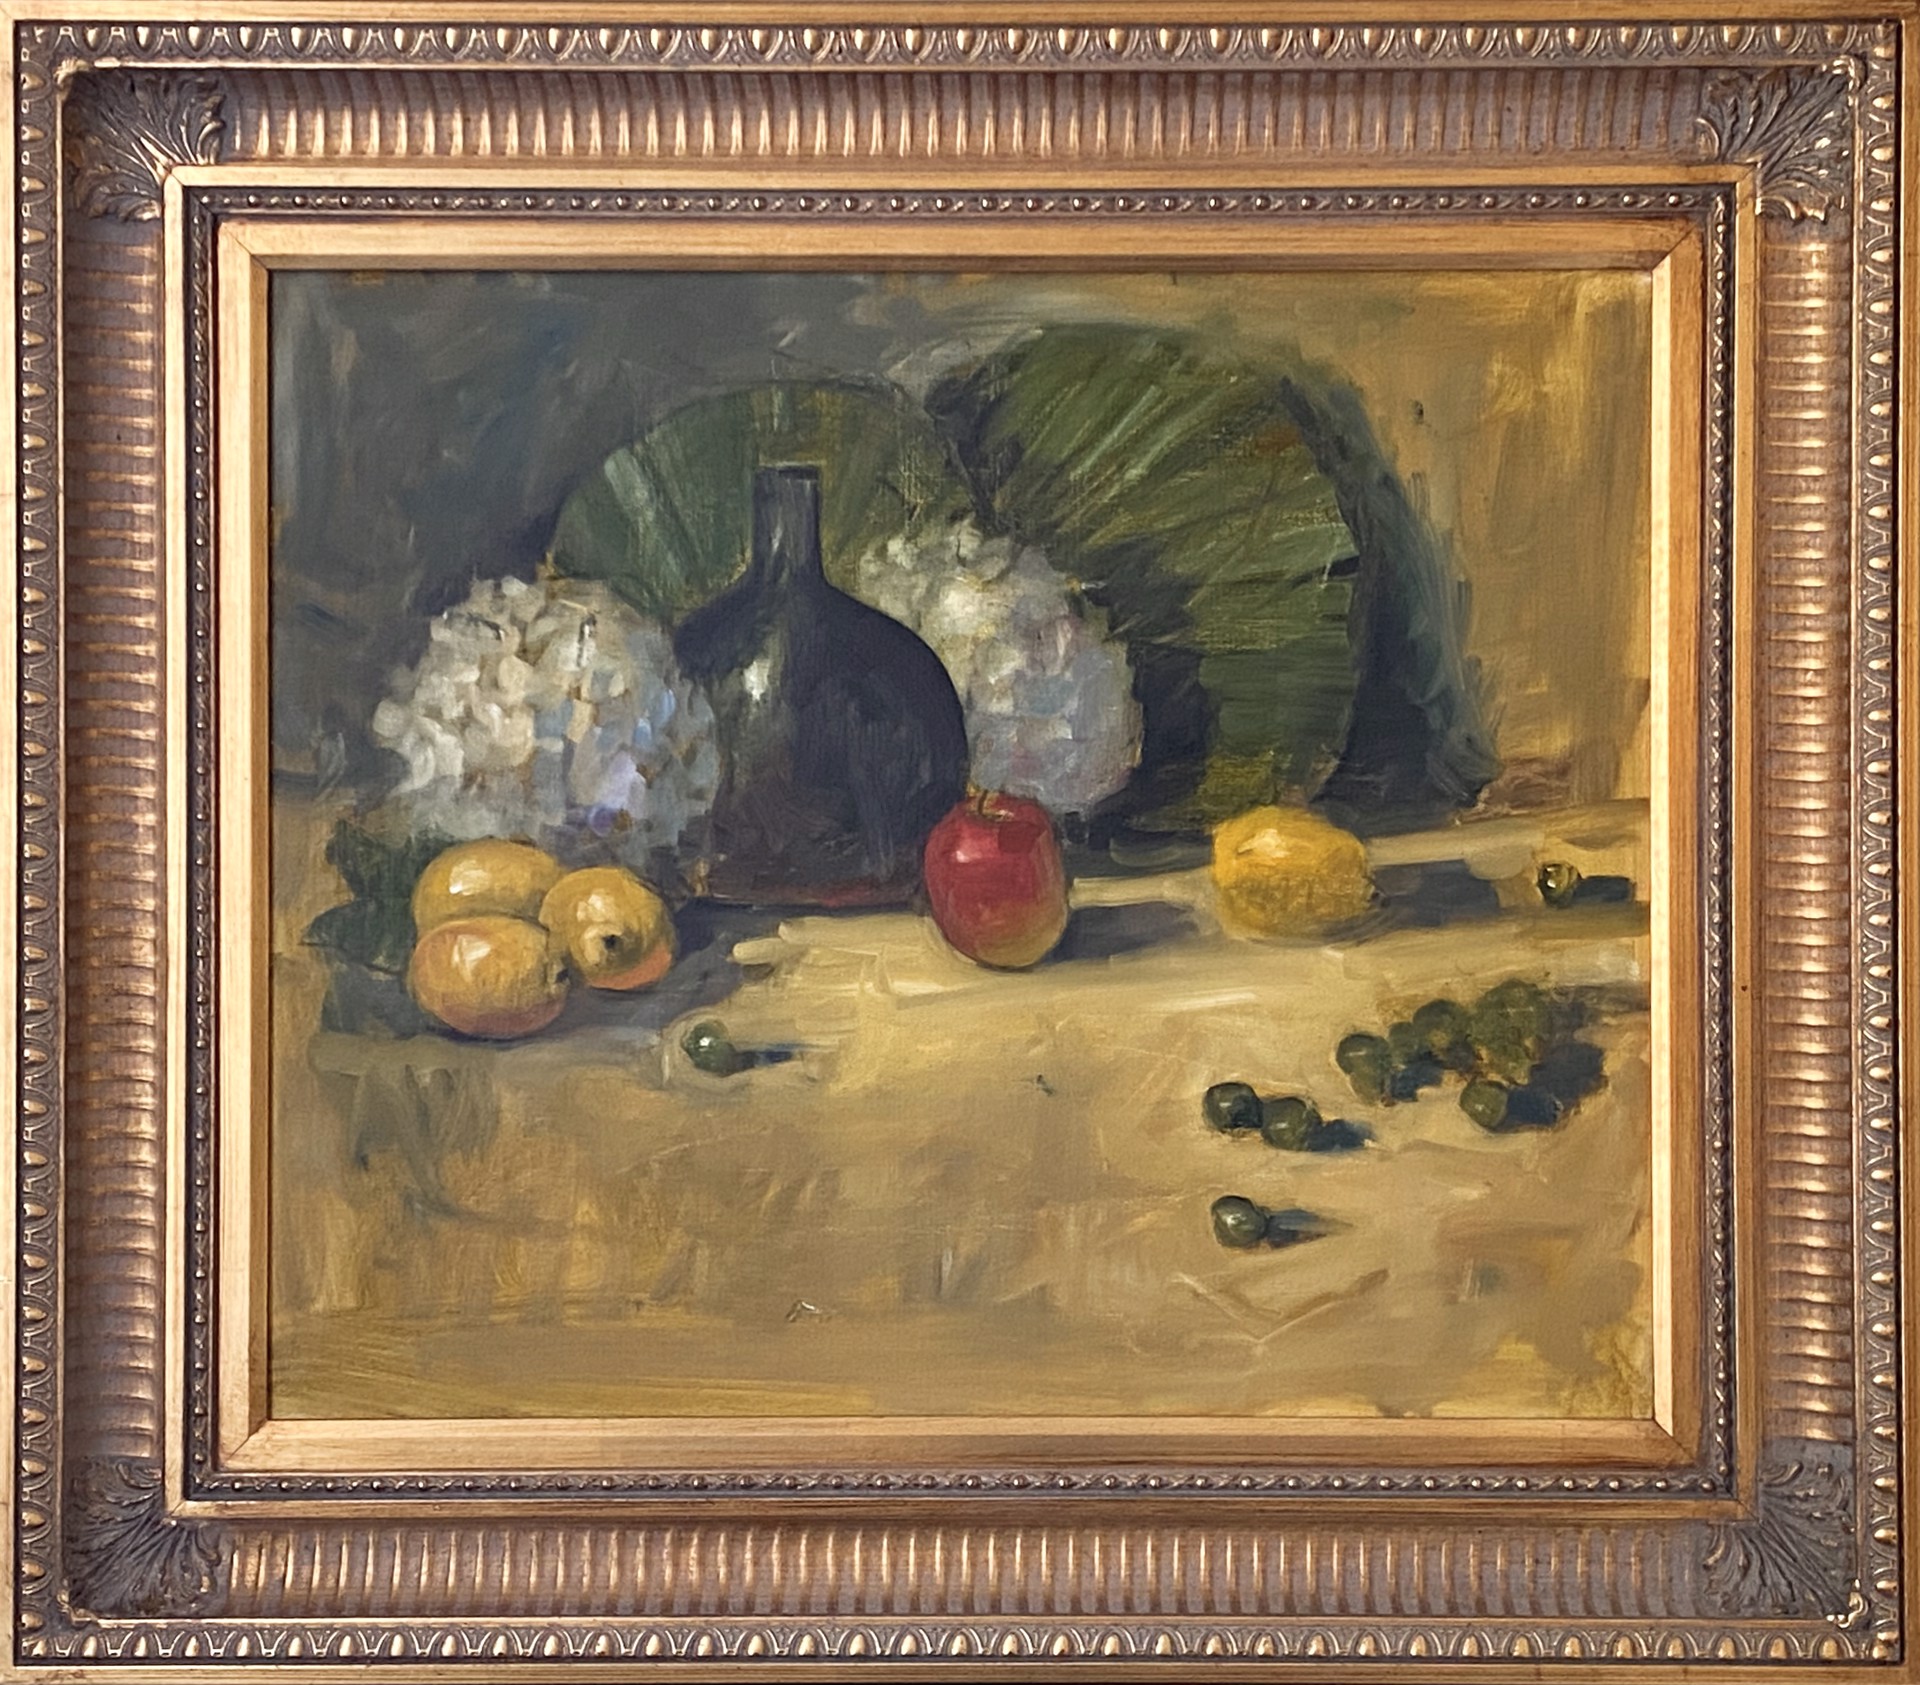 Still Life with Grapes and Apple by John Carroll Doyle